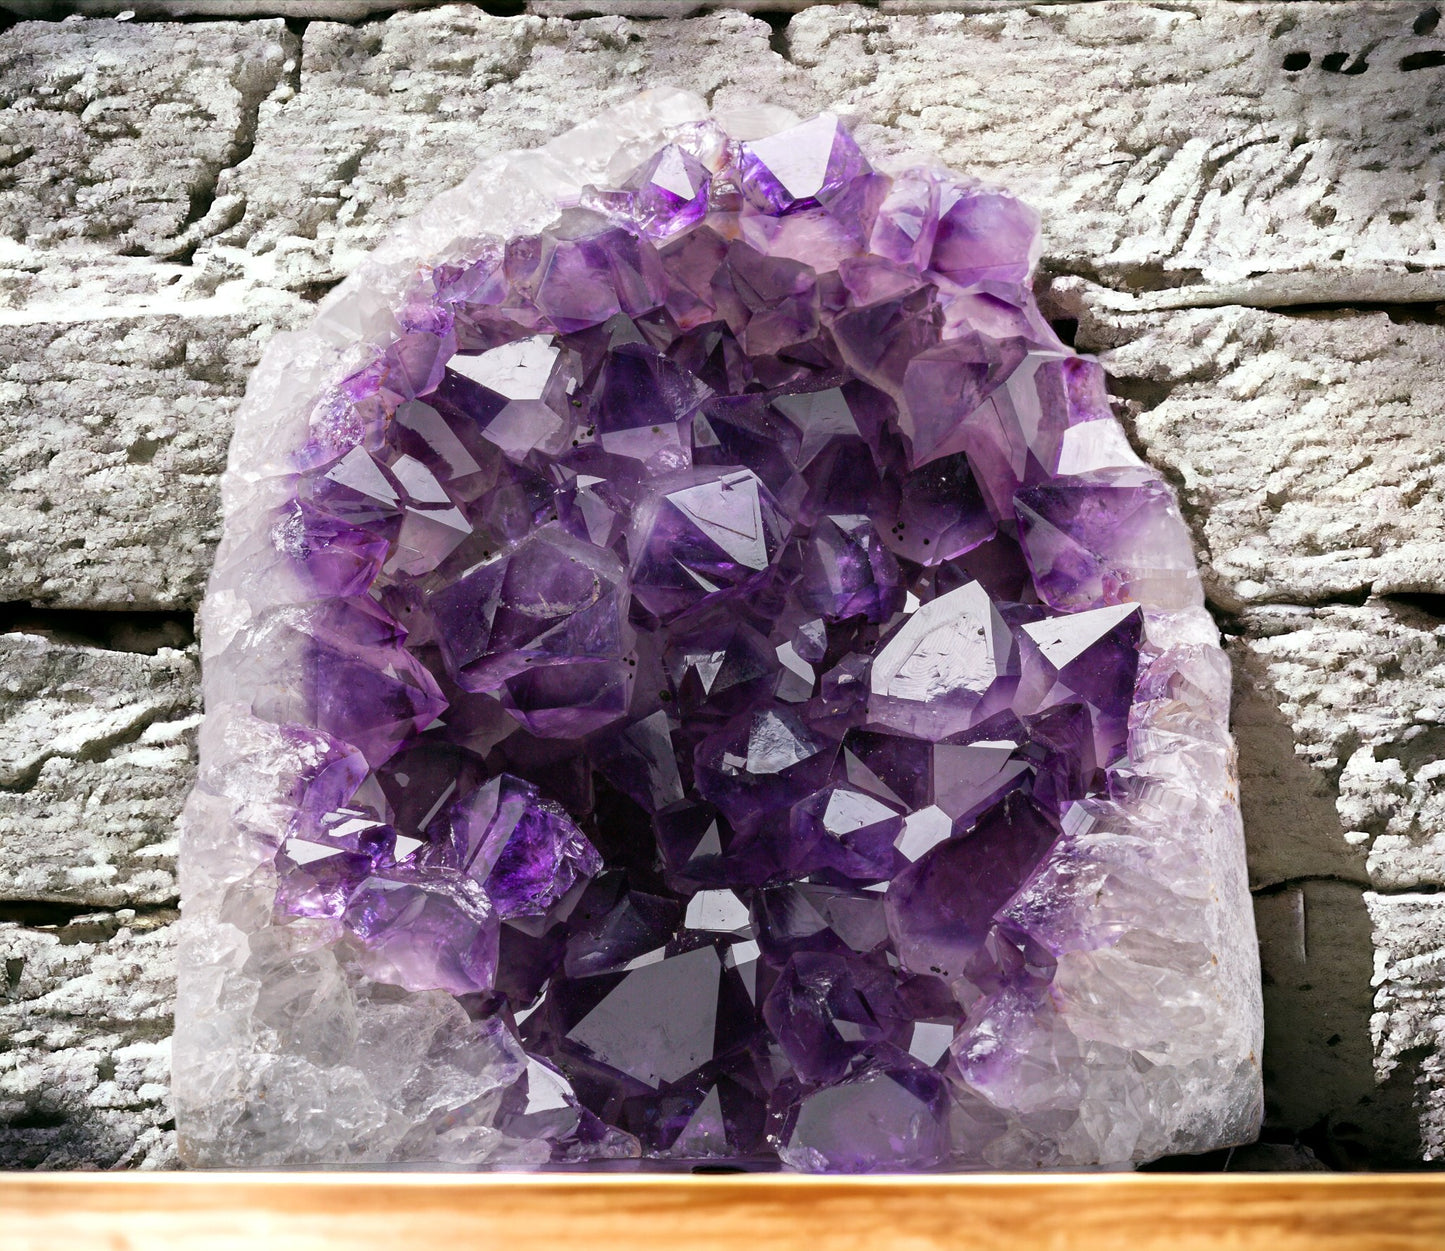 Deep Purple Natural Amethyst Crystal Clusters (2 lb to 3 lb) from Uruguay Raw Geode Quartz